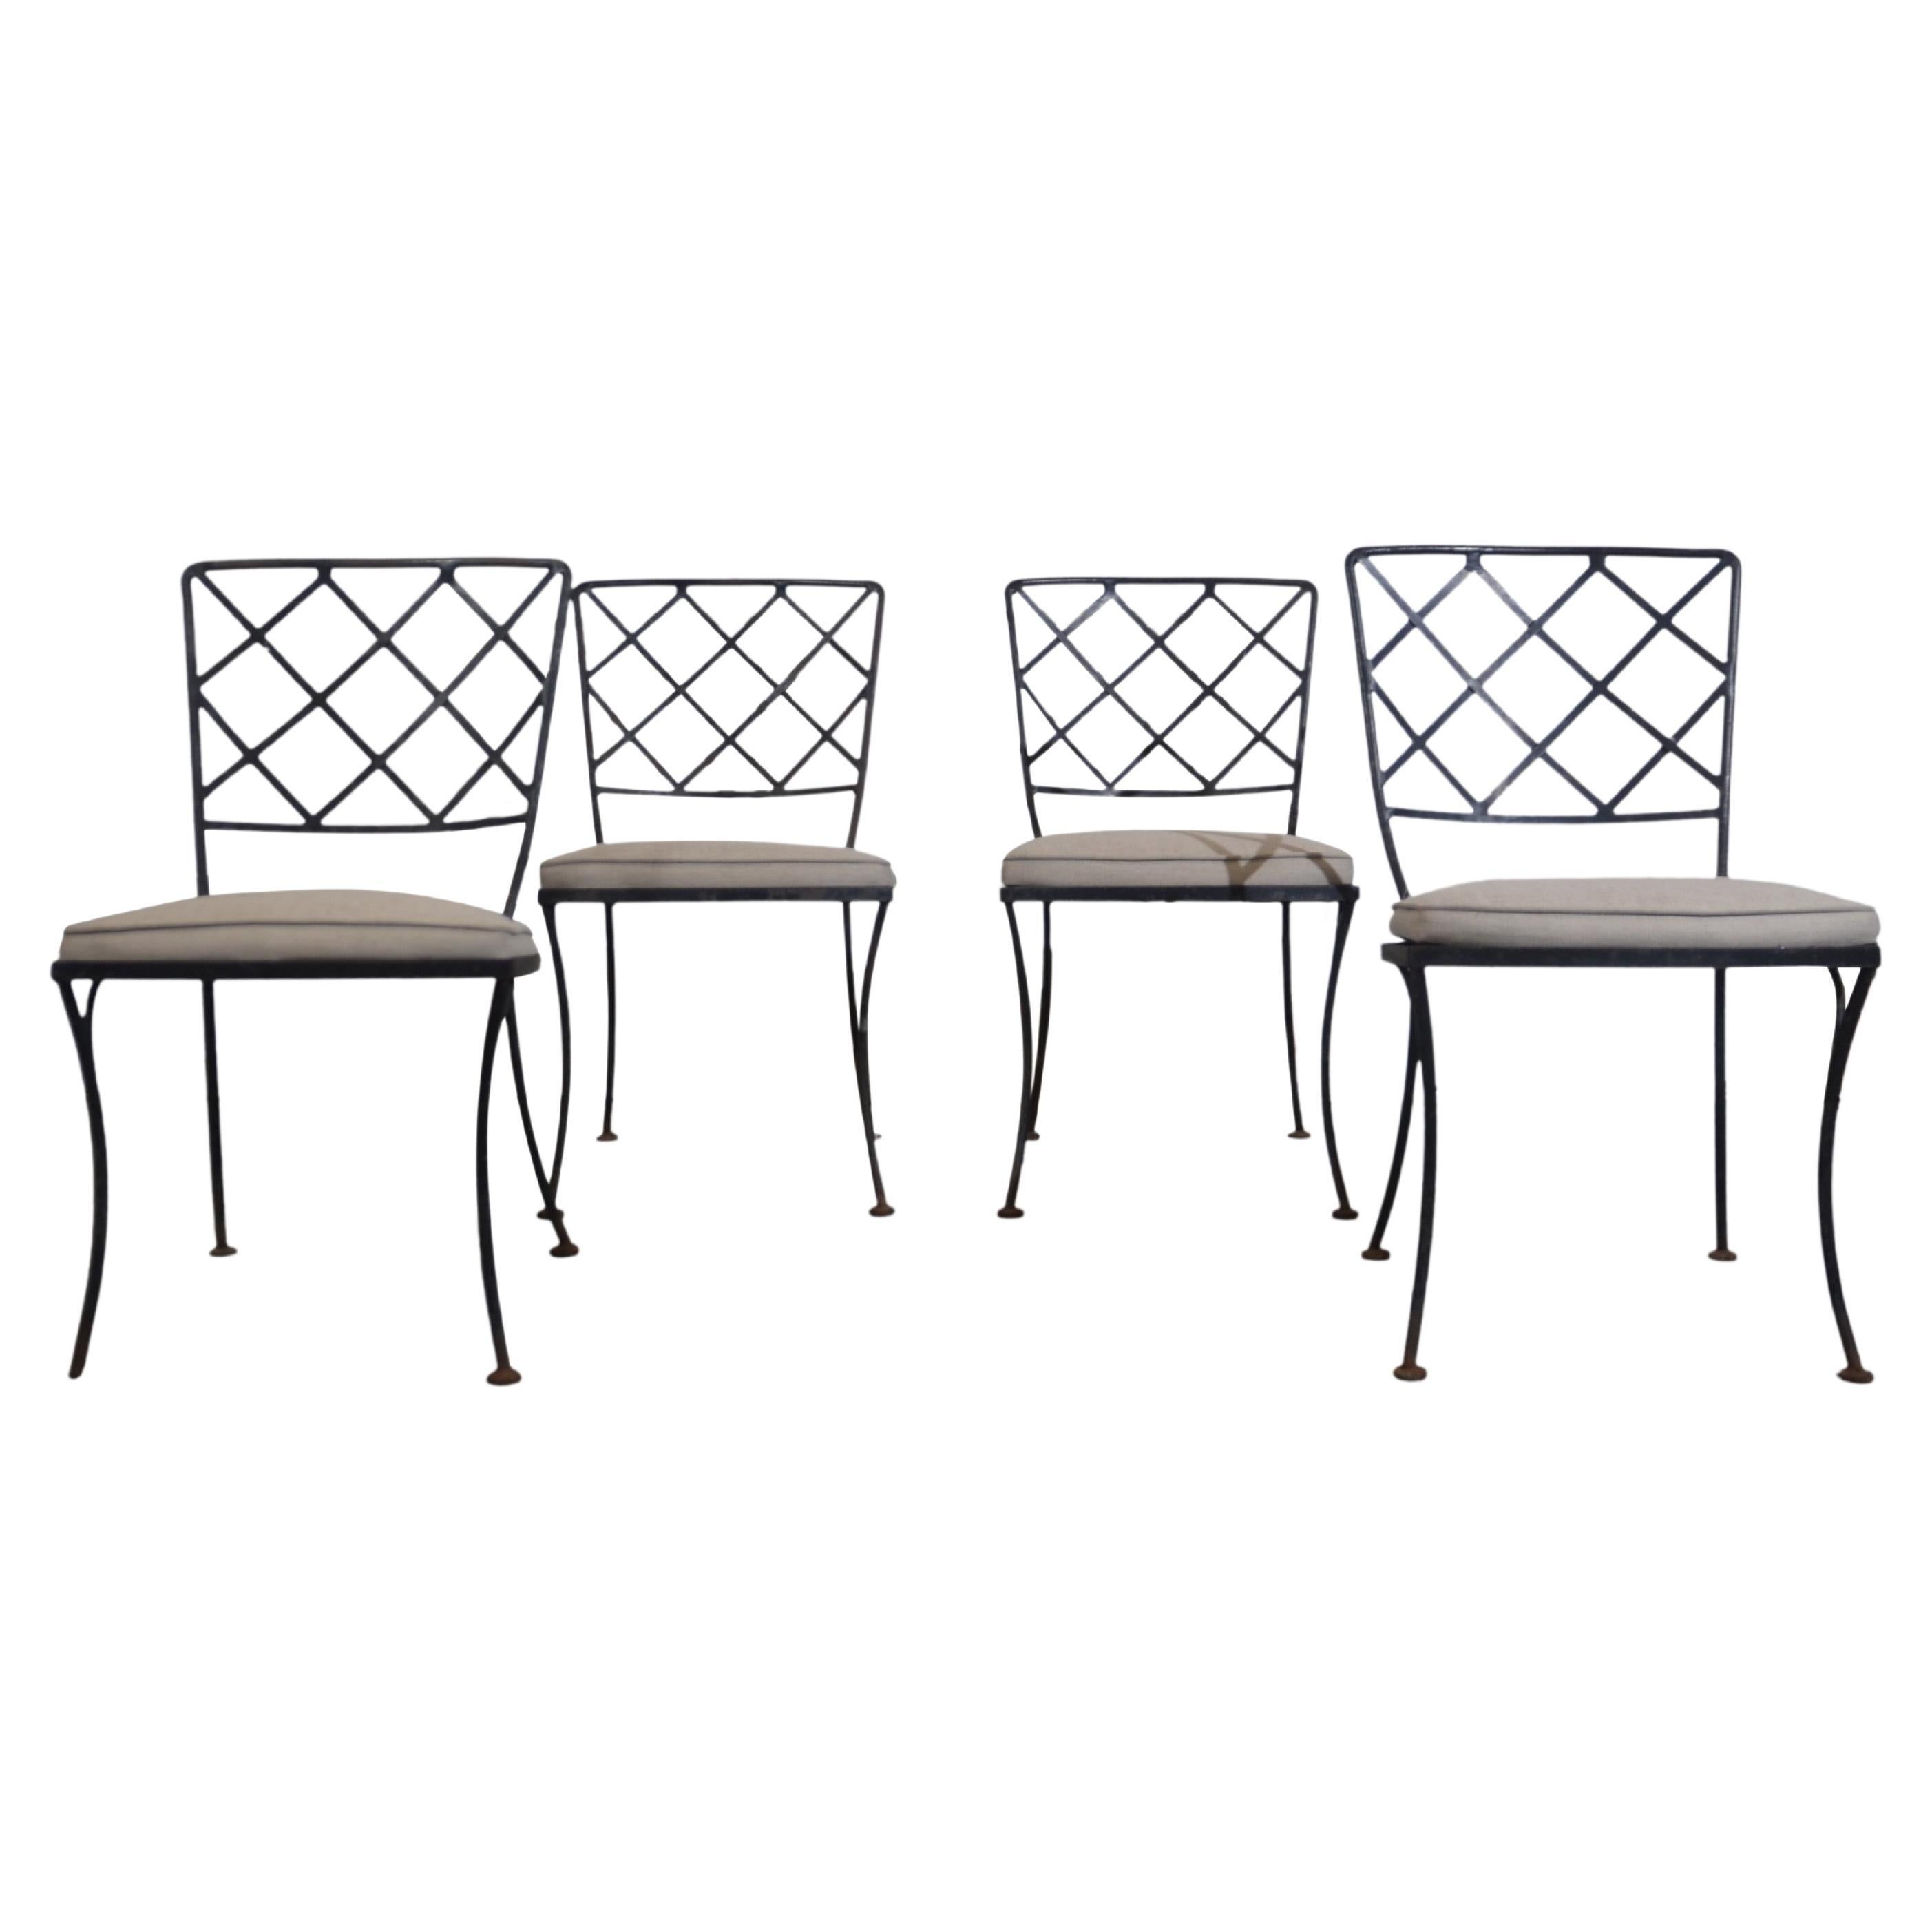 Iron Patio Chairs Set of 4